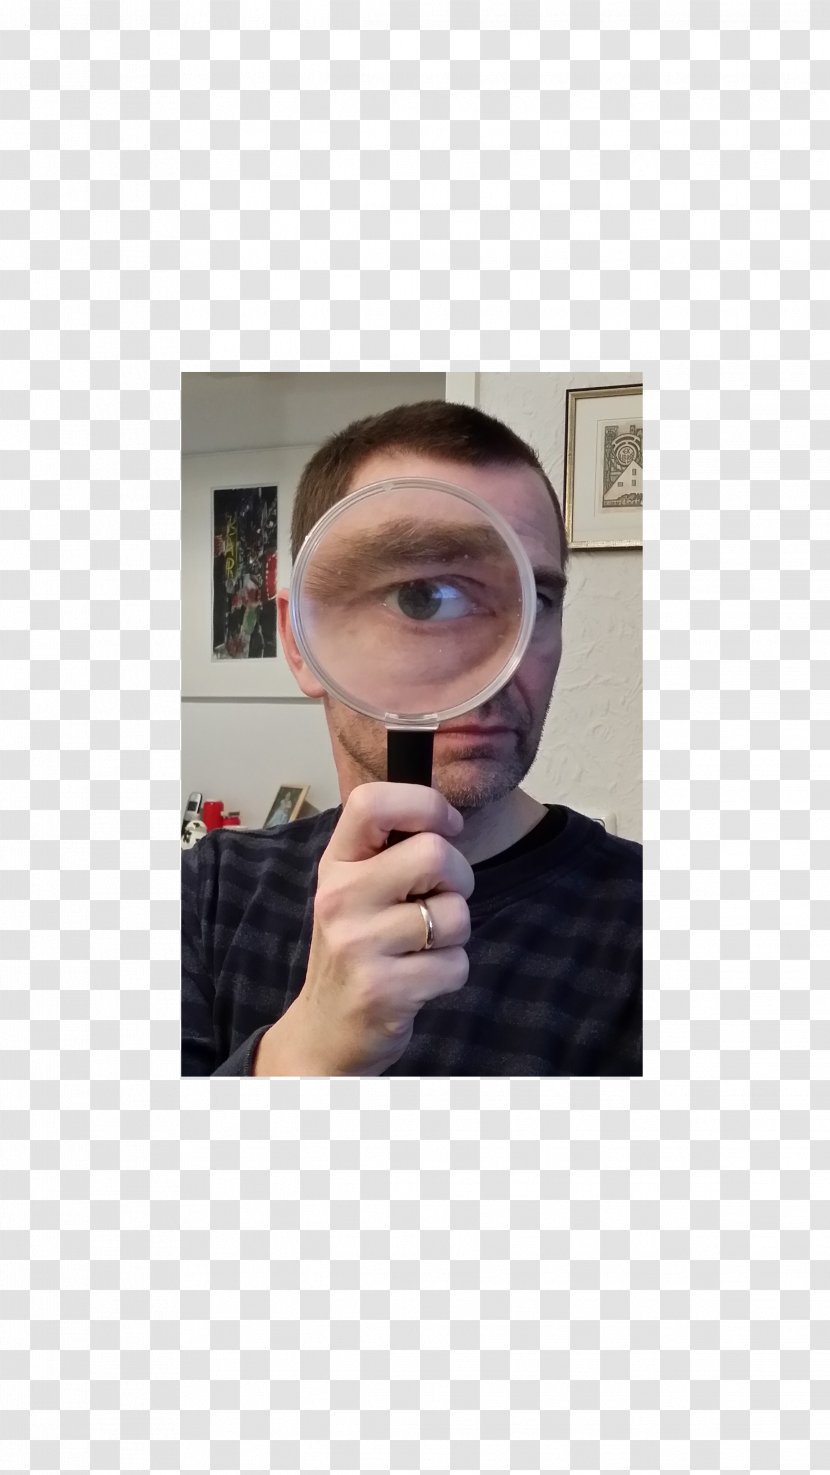 Glasses Goggles Nose Magnifying Glass - Chin Transparent PNG